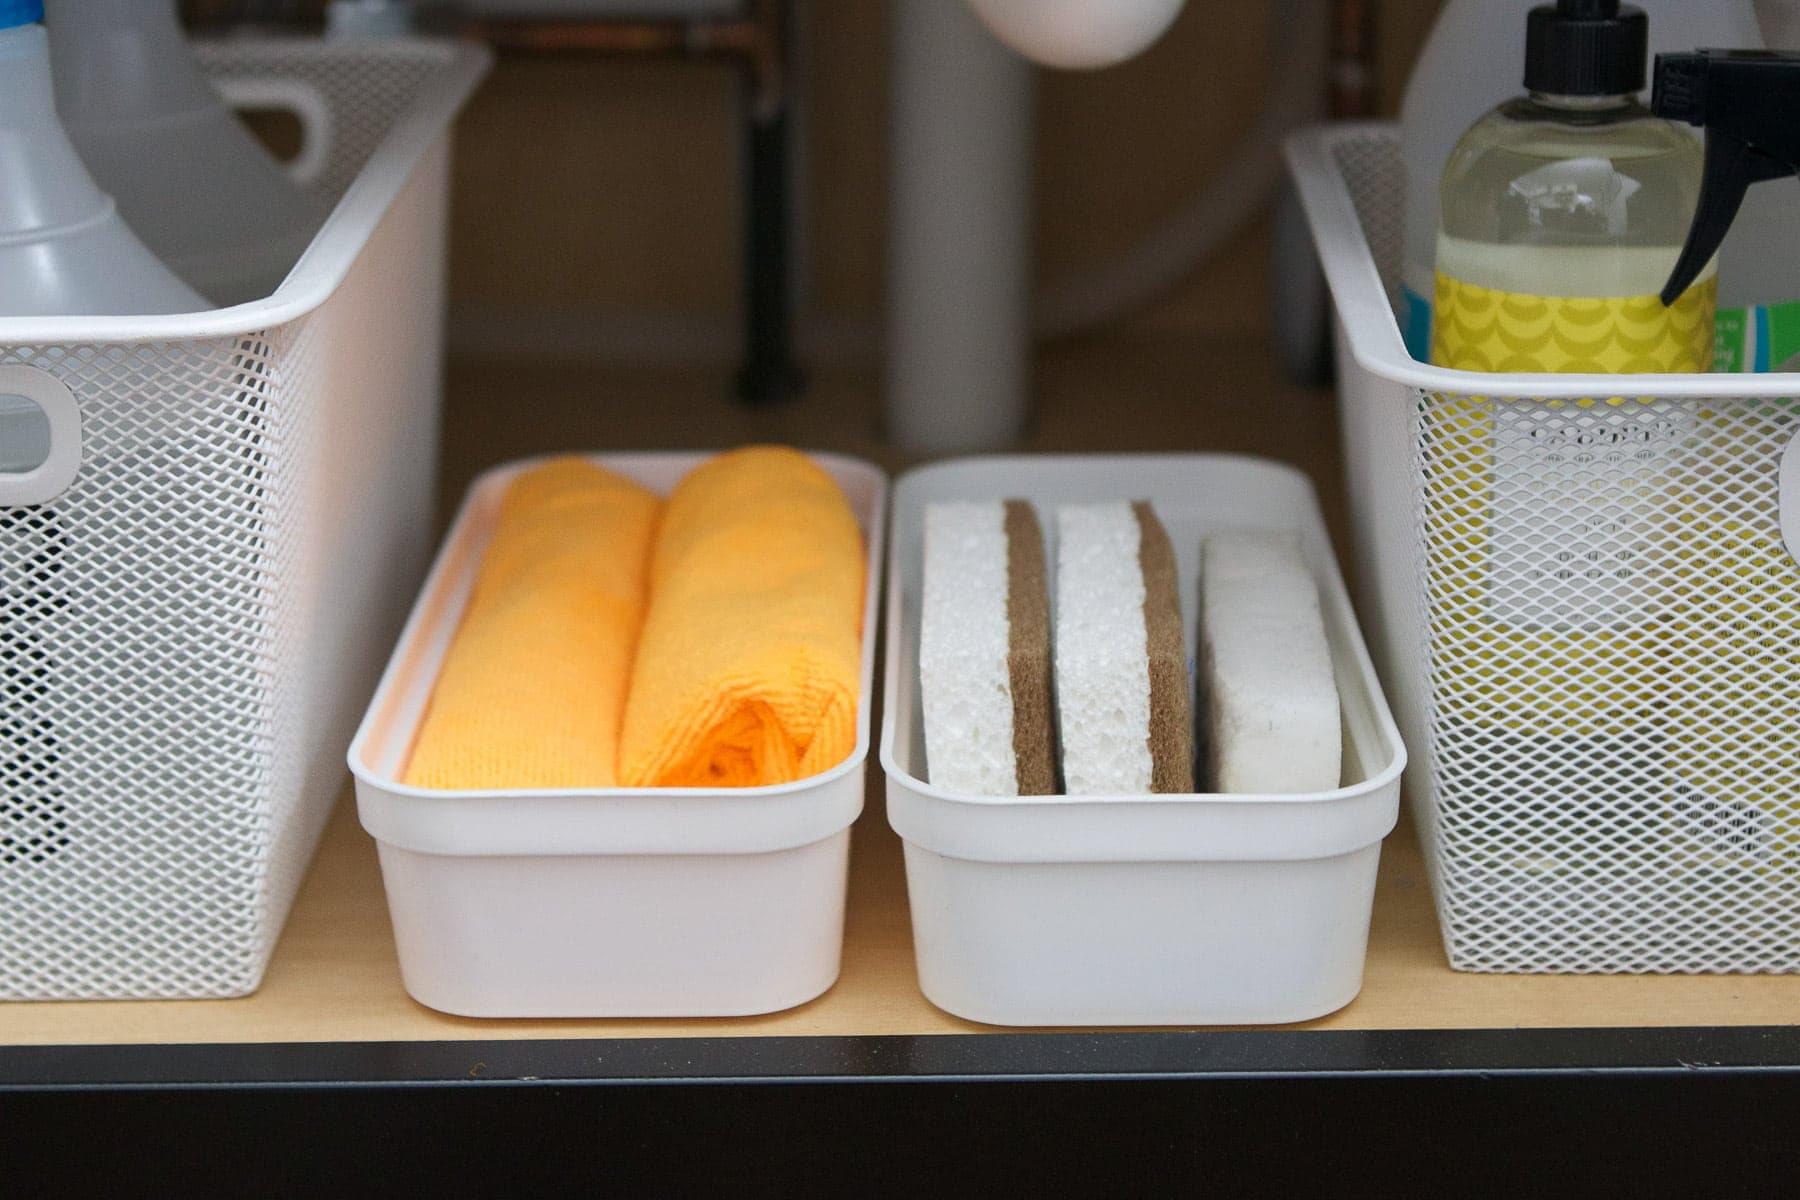 containers under the sink for rags and sponges